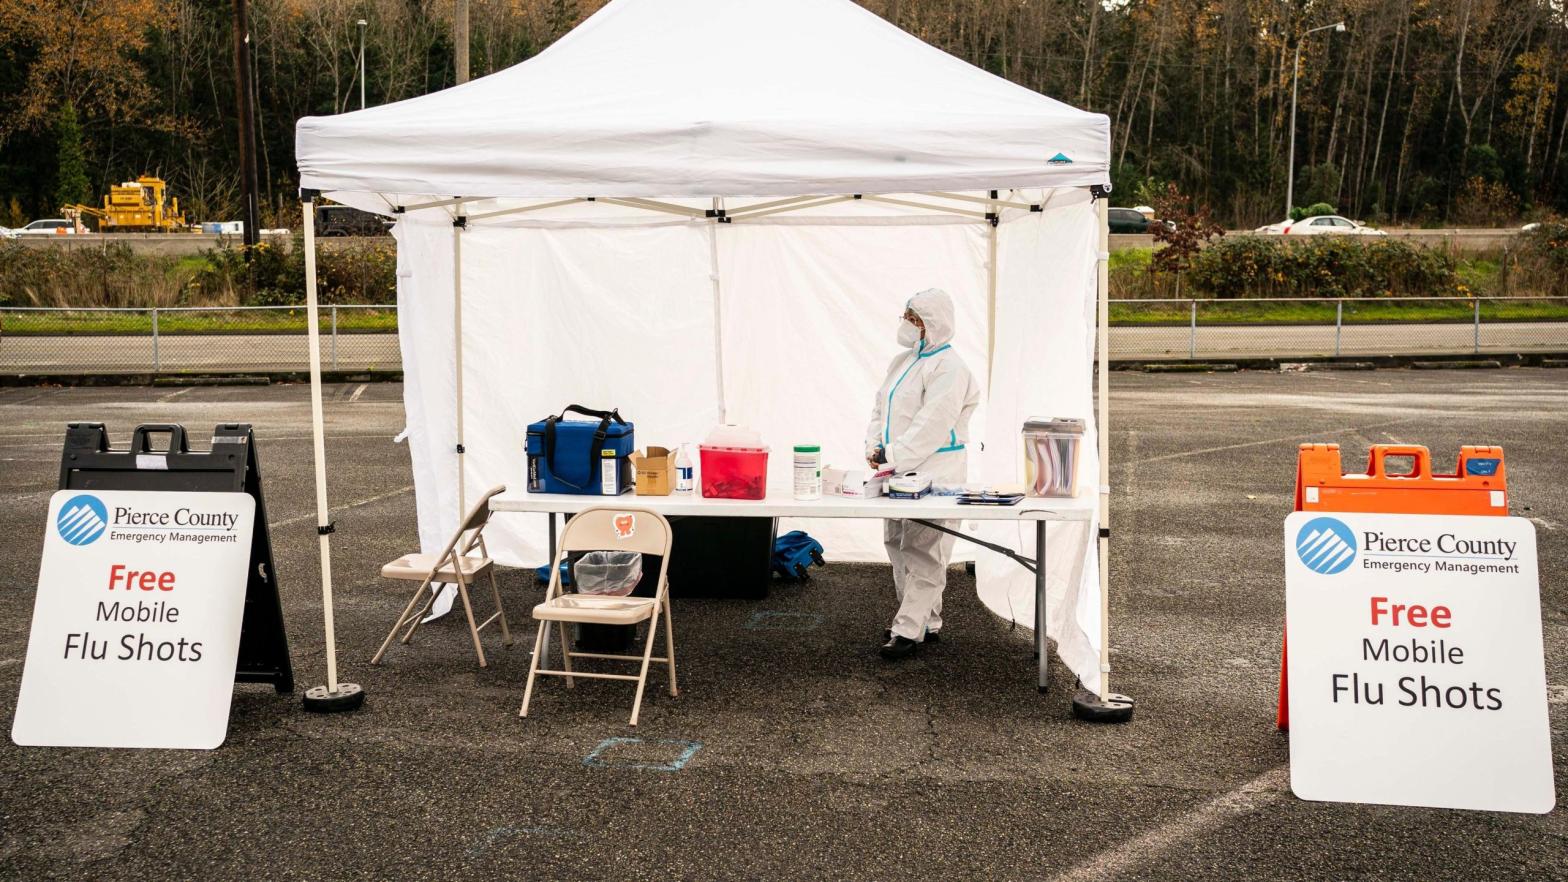 A nurse waits to administer flu shots during a COVID-19 testing and flu shot event at the Tacoma Dome on November 28, 2020 in Tacoma, Washington. (Image: David Ryder, Getty Images)